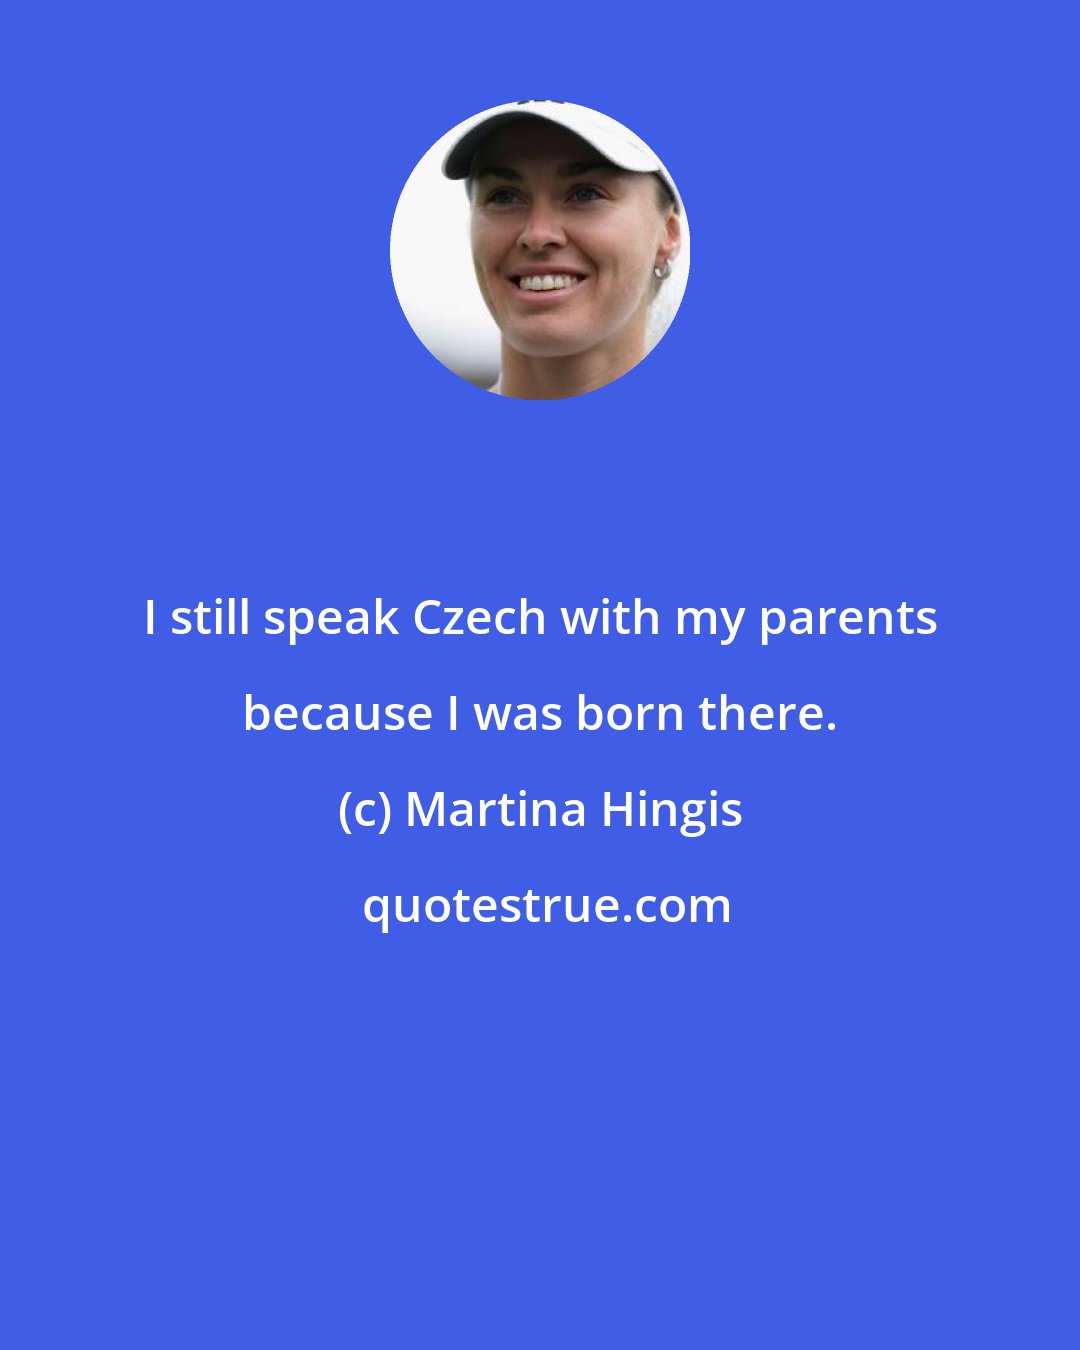 Martina Hingis: I still speak Czech with my parents because I was born there.